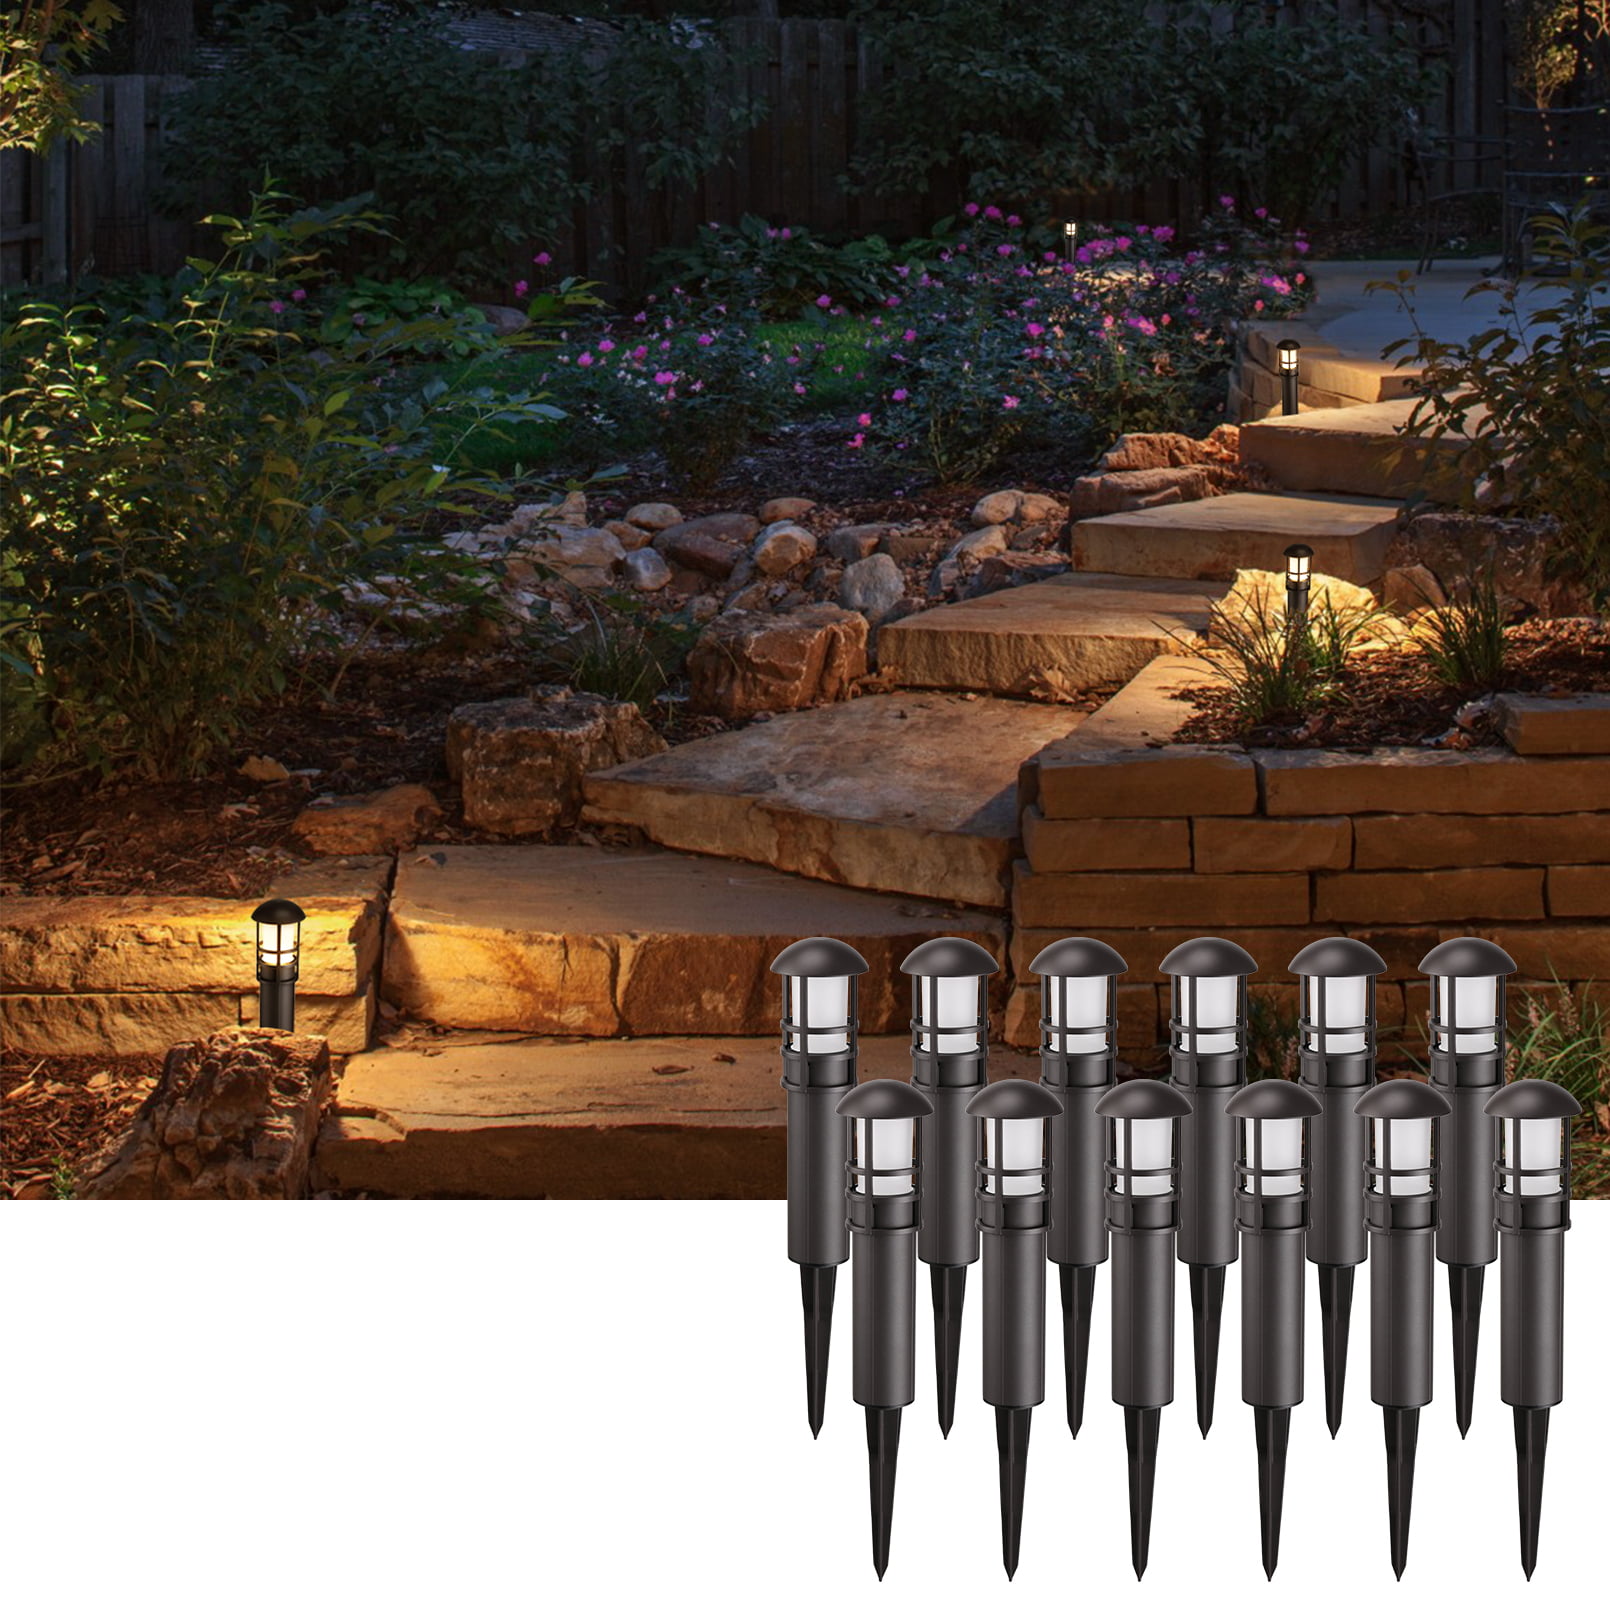 Details about   Show Lights 6 Feet Long White Picket Fence Pathway LED Lights Christmas Weddings 